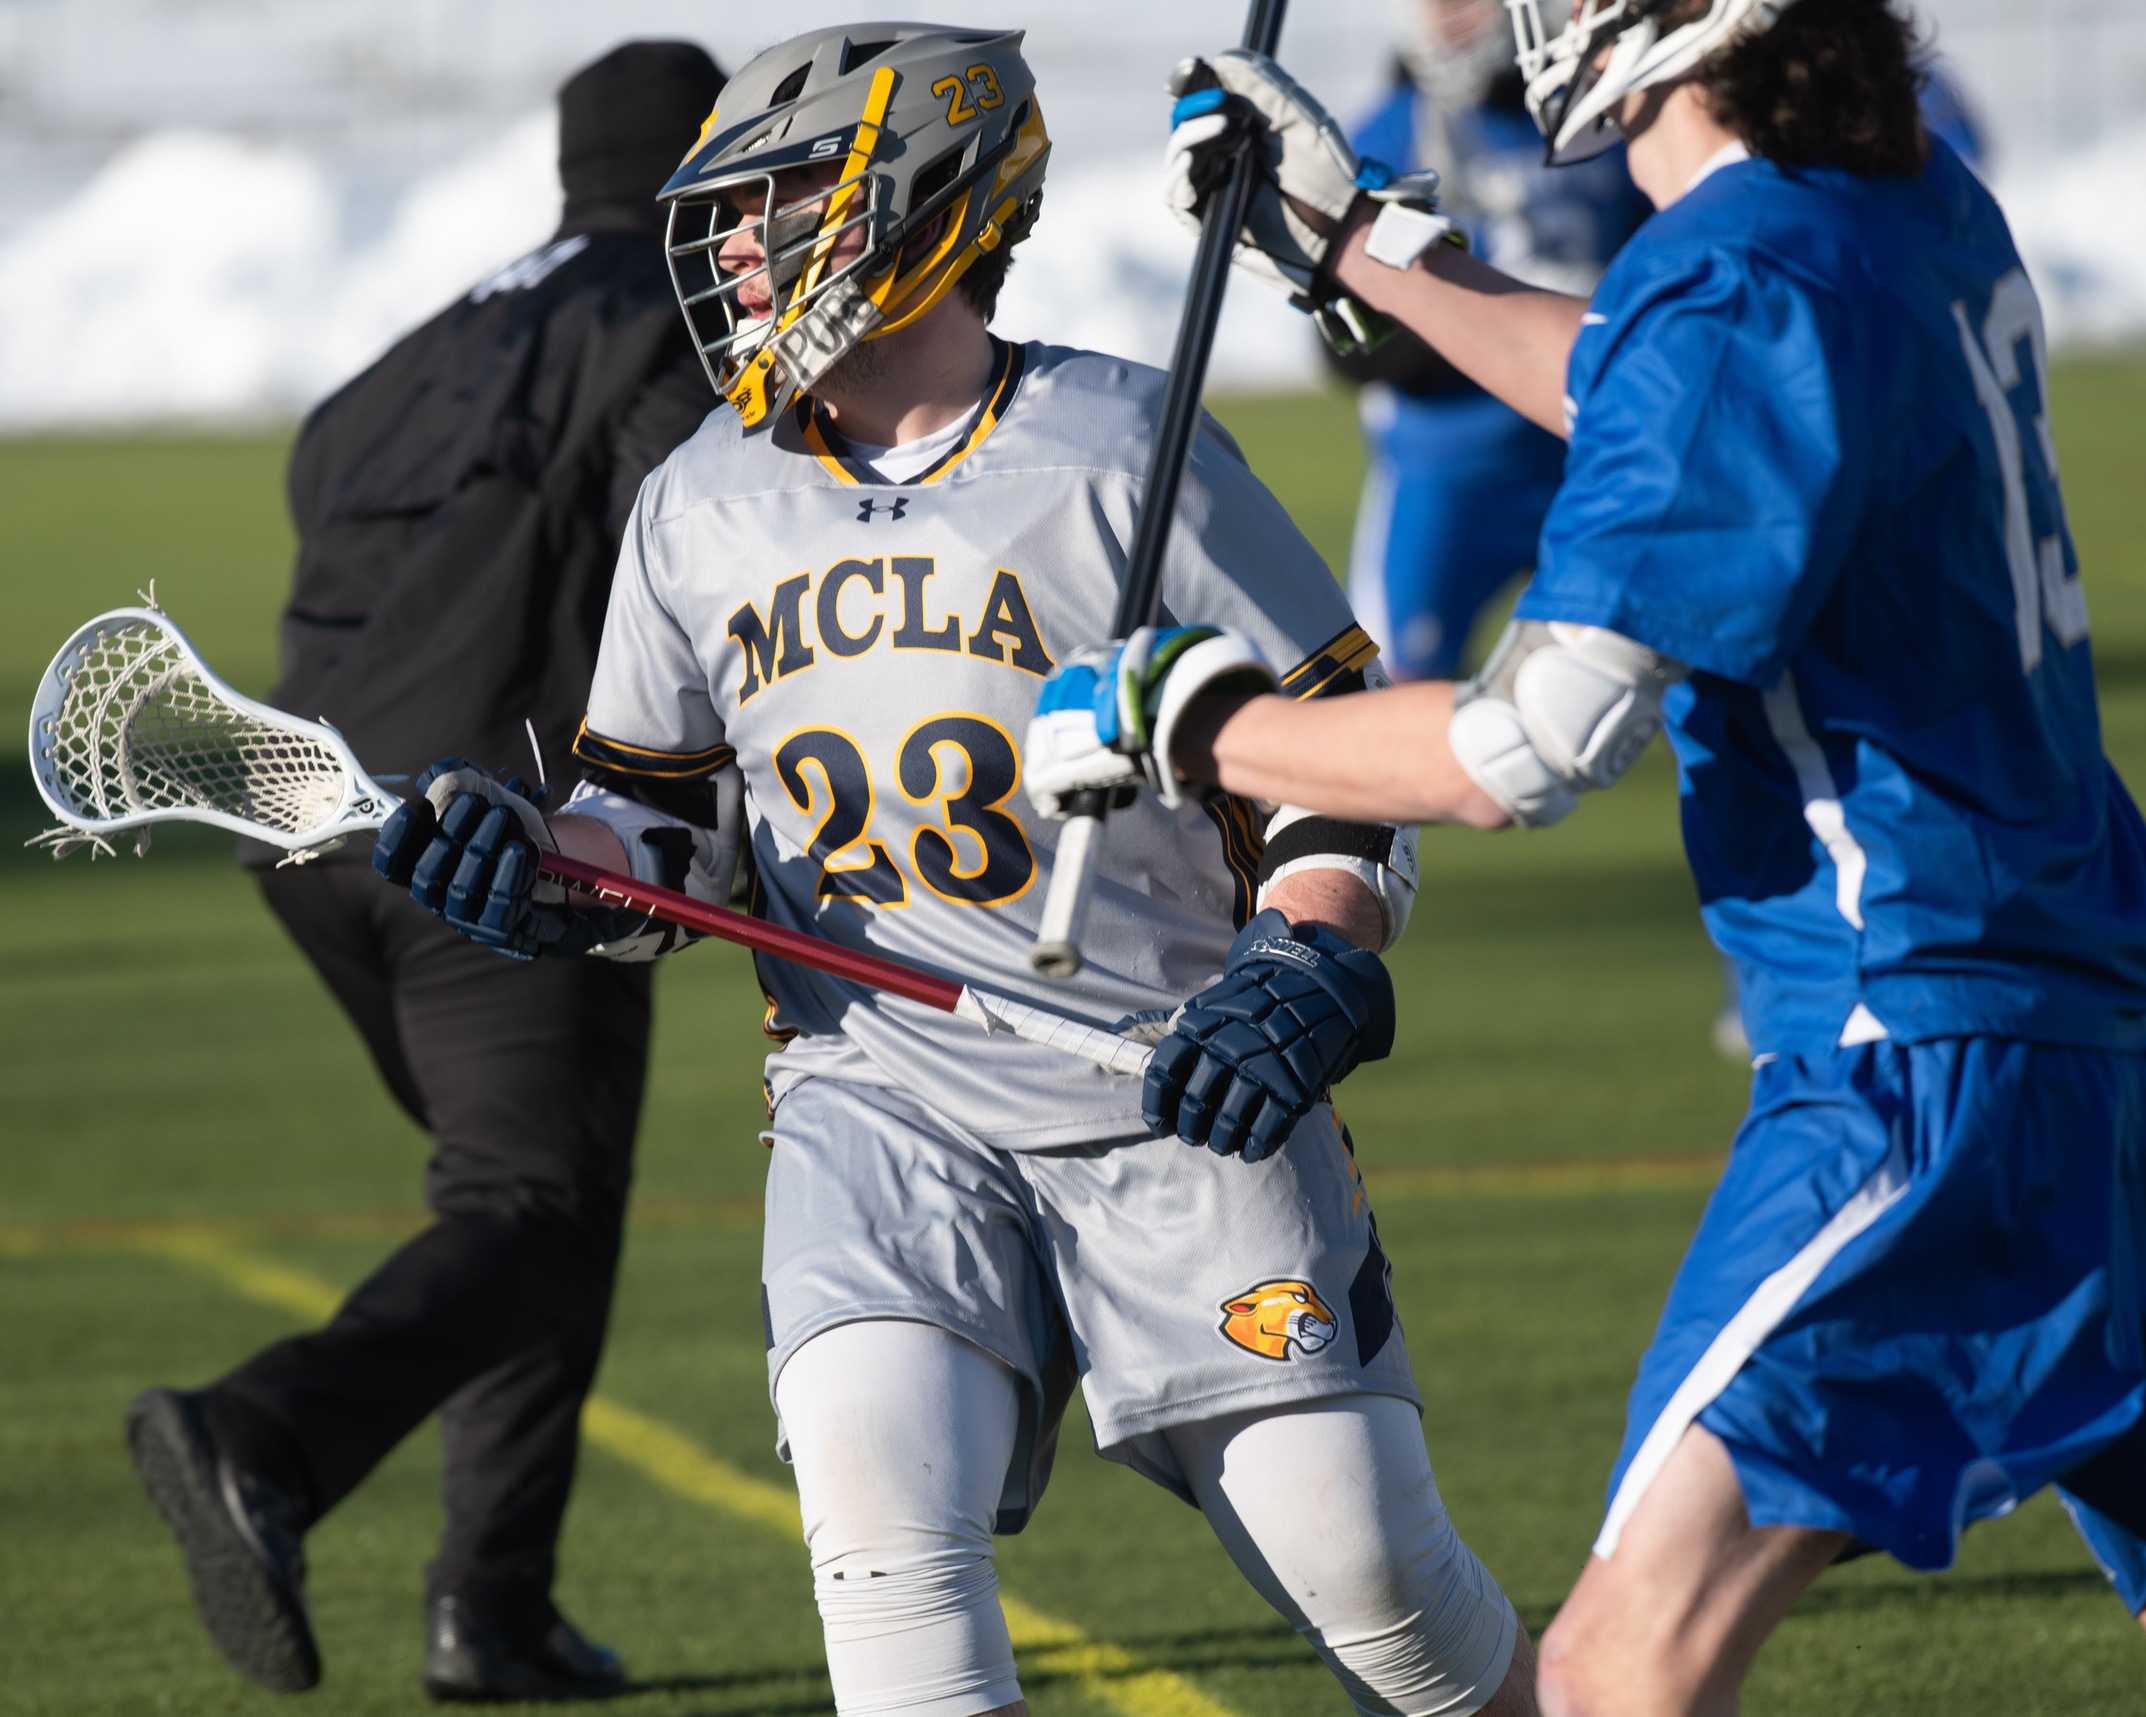 Men's Lacrosse falls to Maine Maritime 22-10 in conference opener